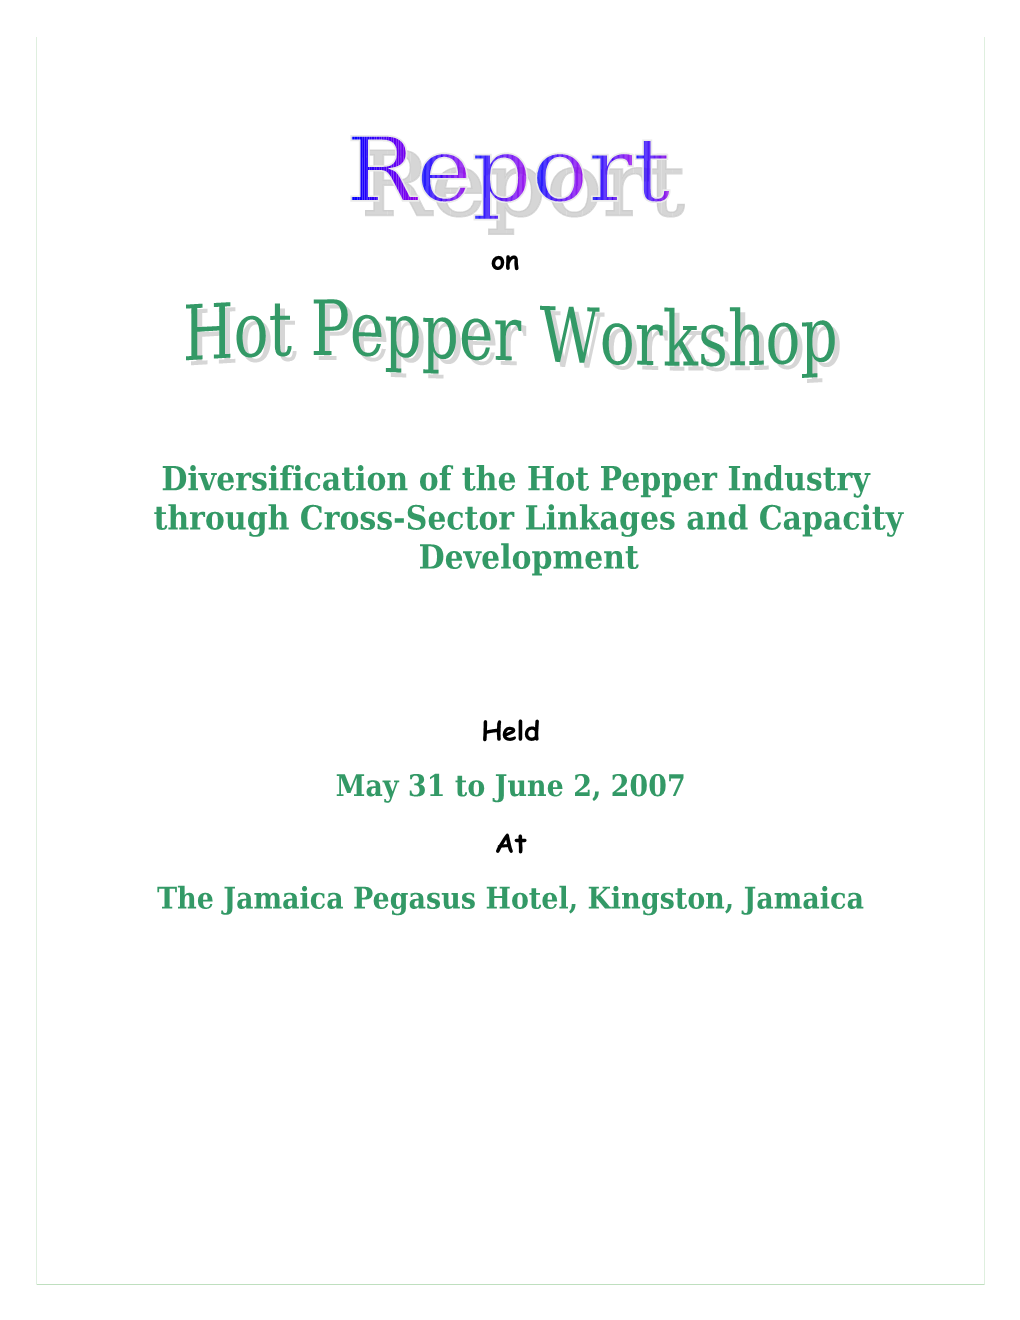 Diversification of the Hot Pepper Industry Through Cross-Sector Linkages and Capacity